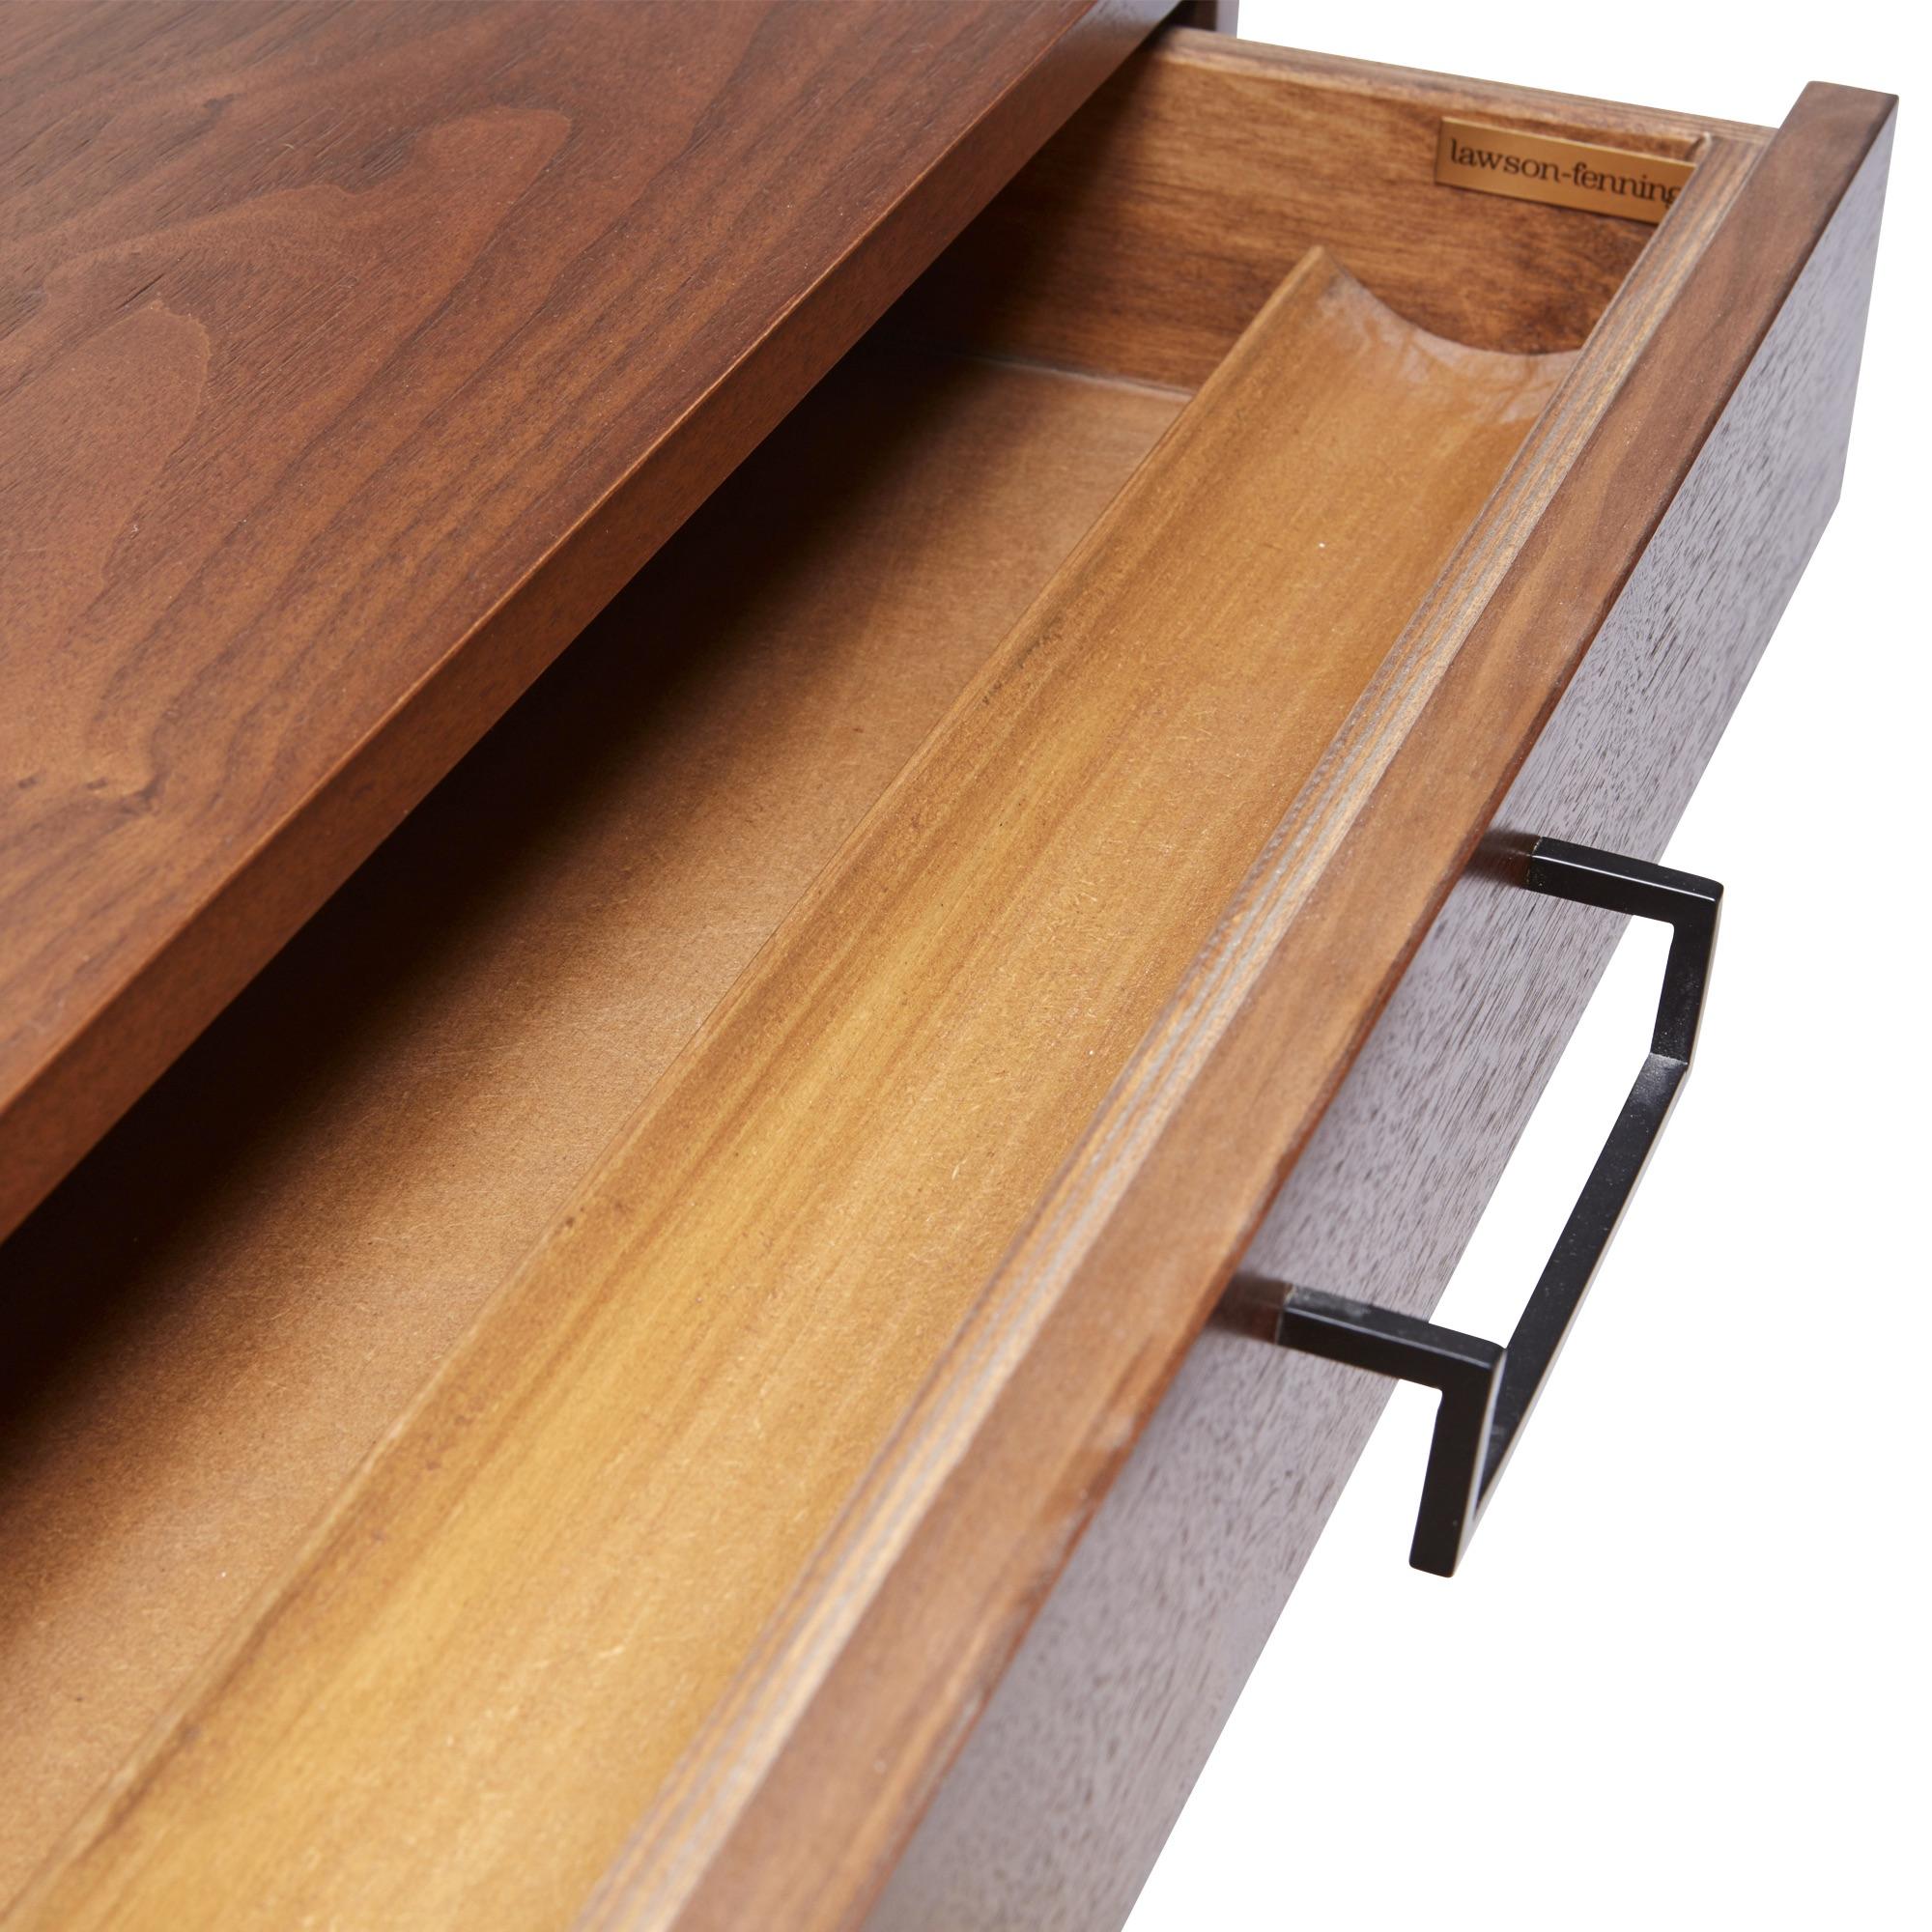 The thin frame desk has two drawers, each with its own pencil tray and features a plated steel base and handles. Available in American walnut or white oak. 


 